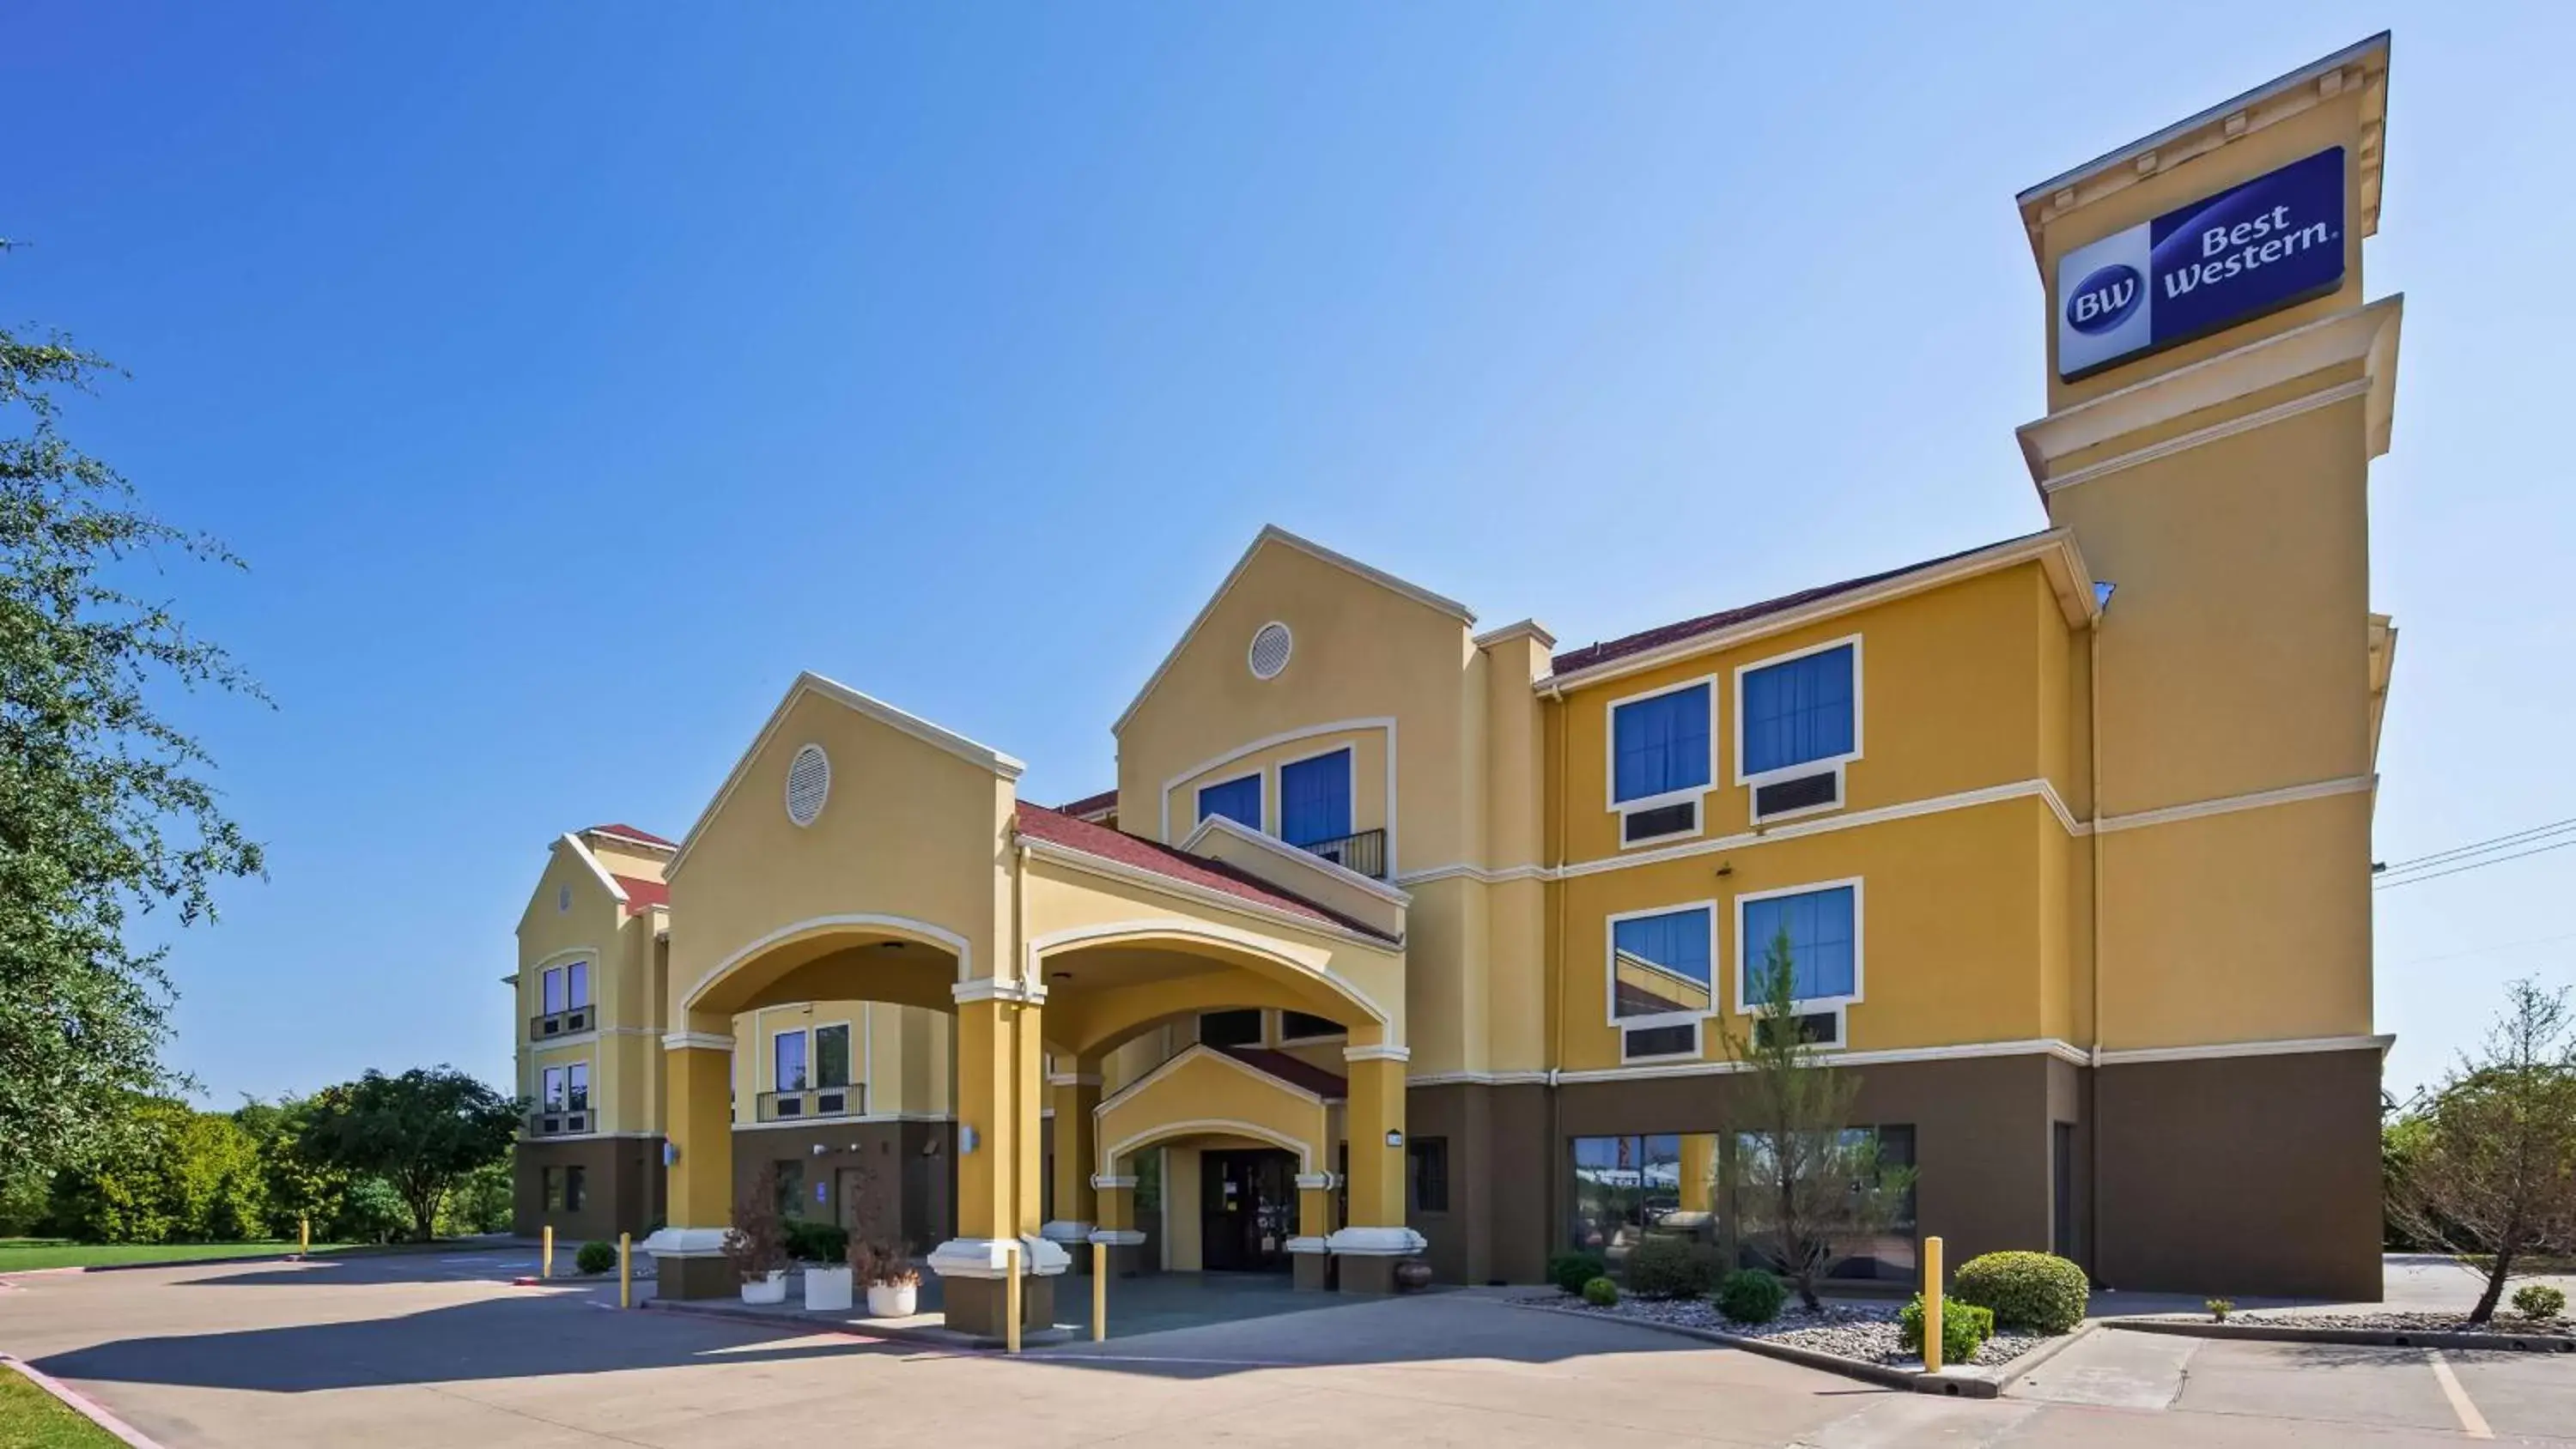 Property building in Best Western Executive Inn Corsicana